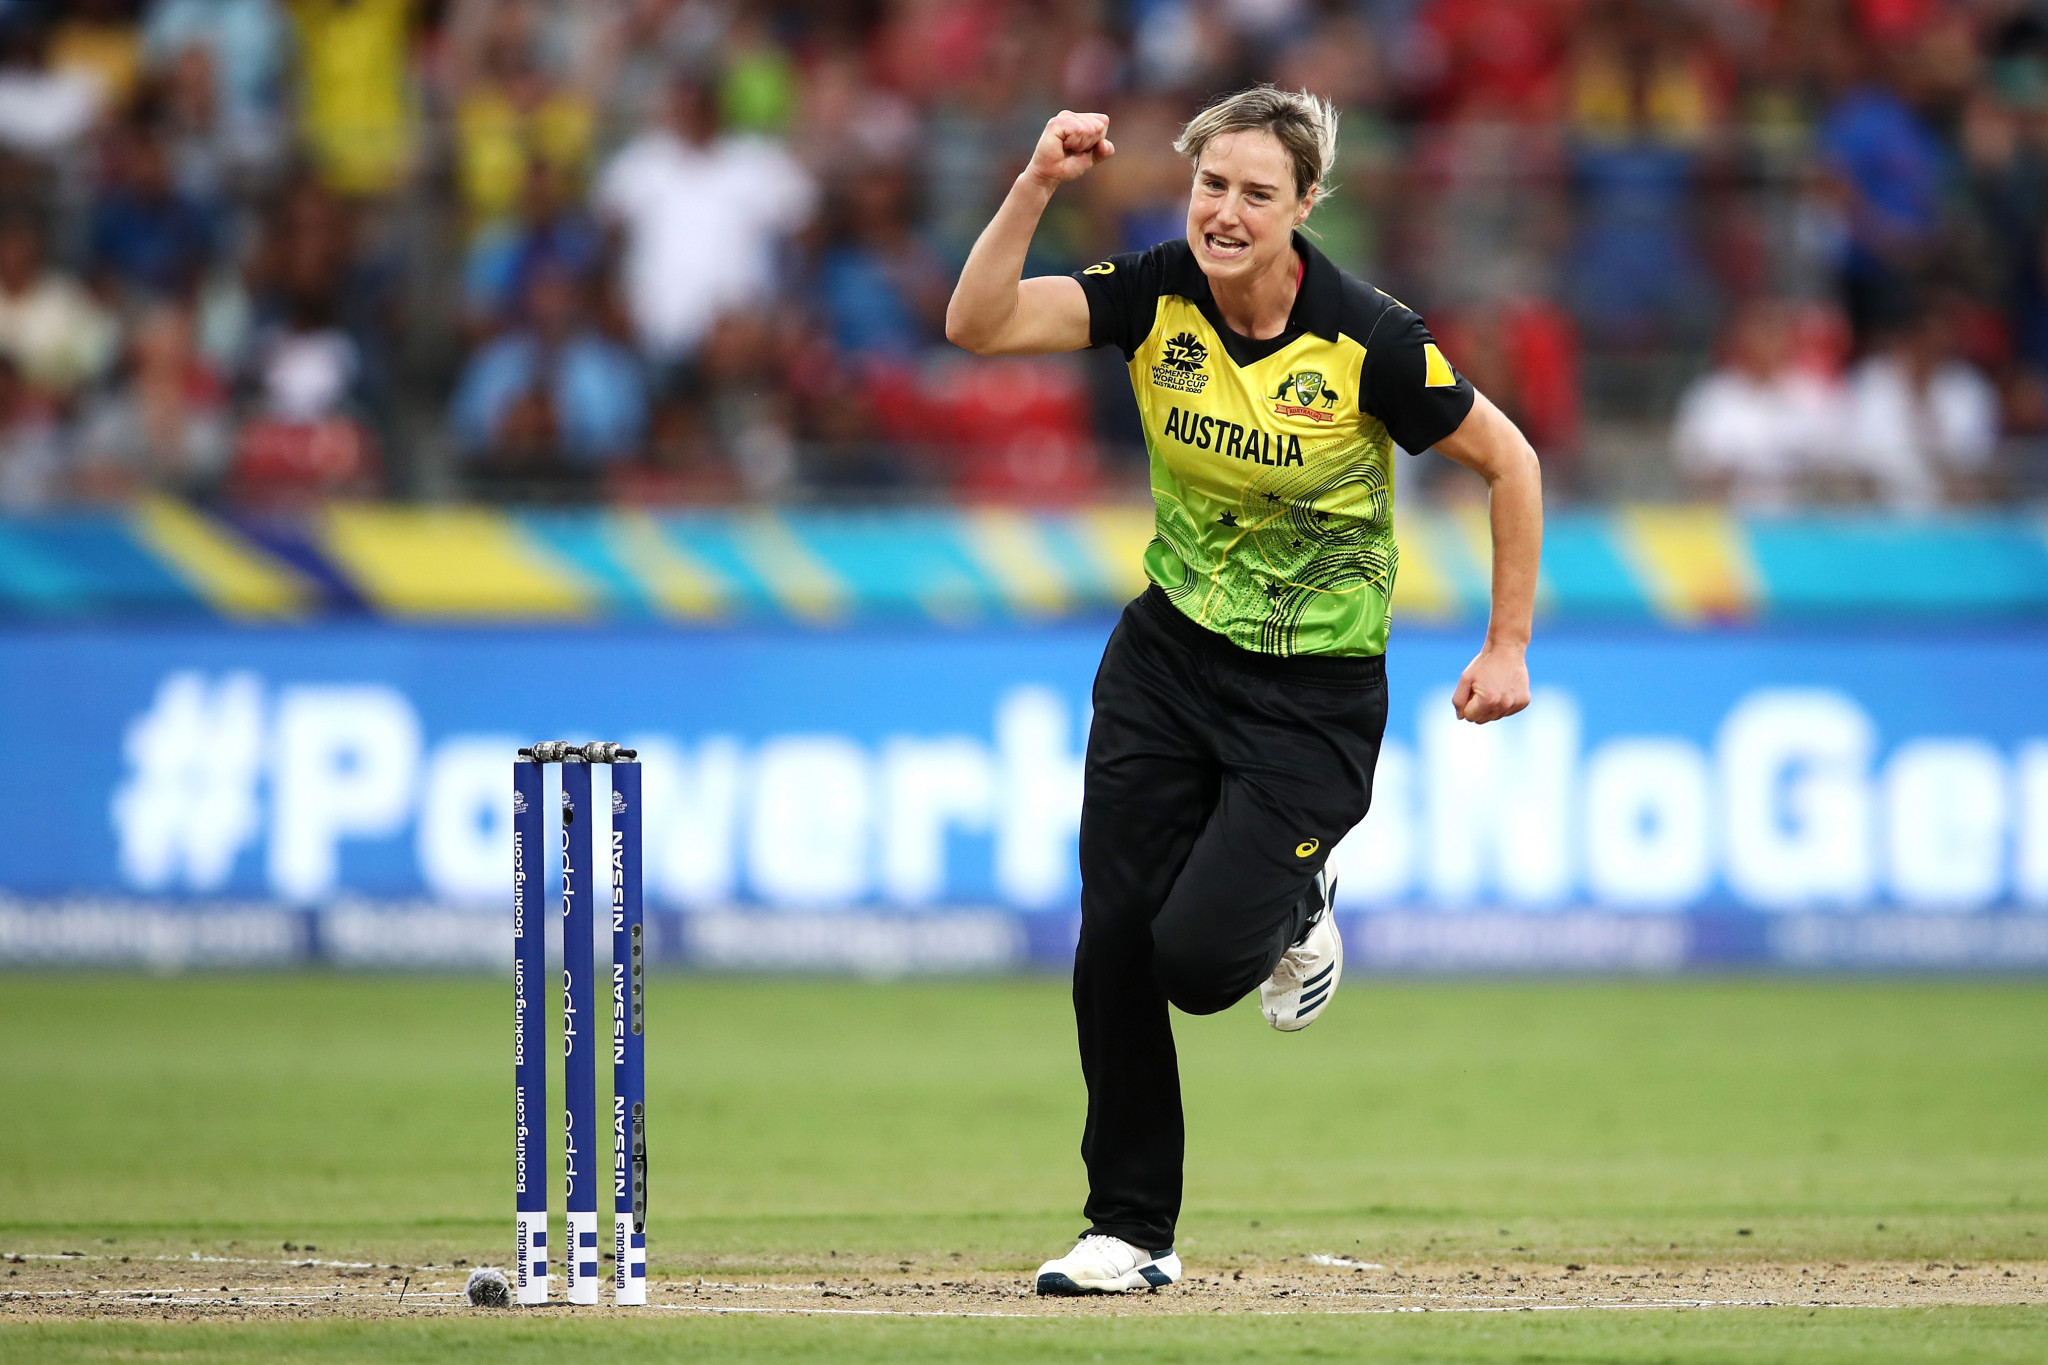 Women's Twenty20 cricket is on the Birmingham 2022 Commonwealth Games programme, while the sport is also set to feature at next year's Asian Games ©Getty Images